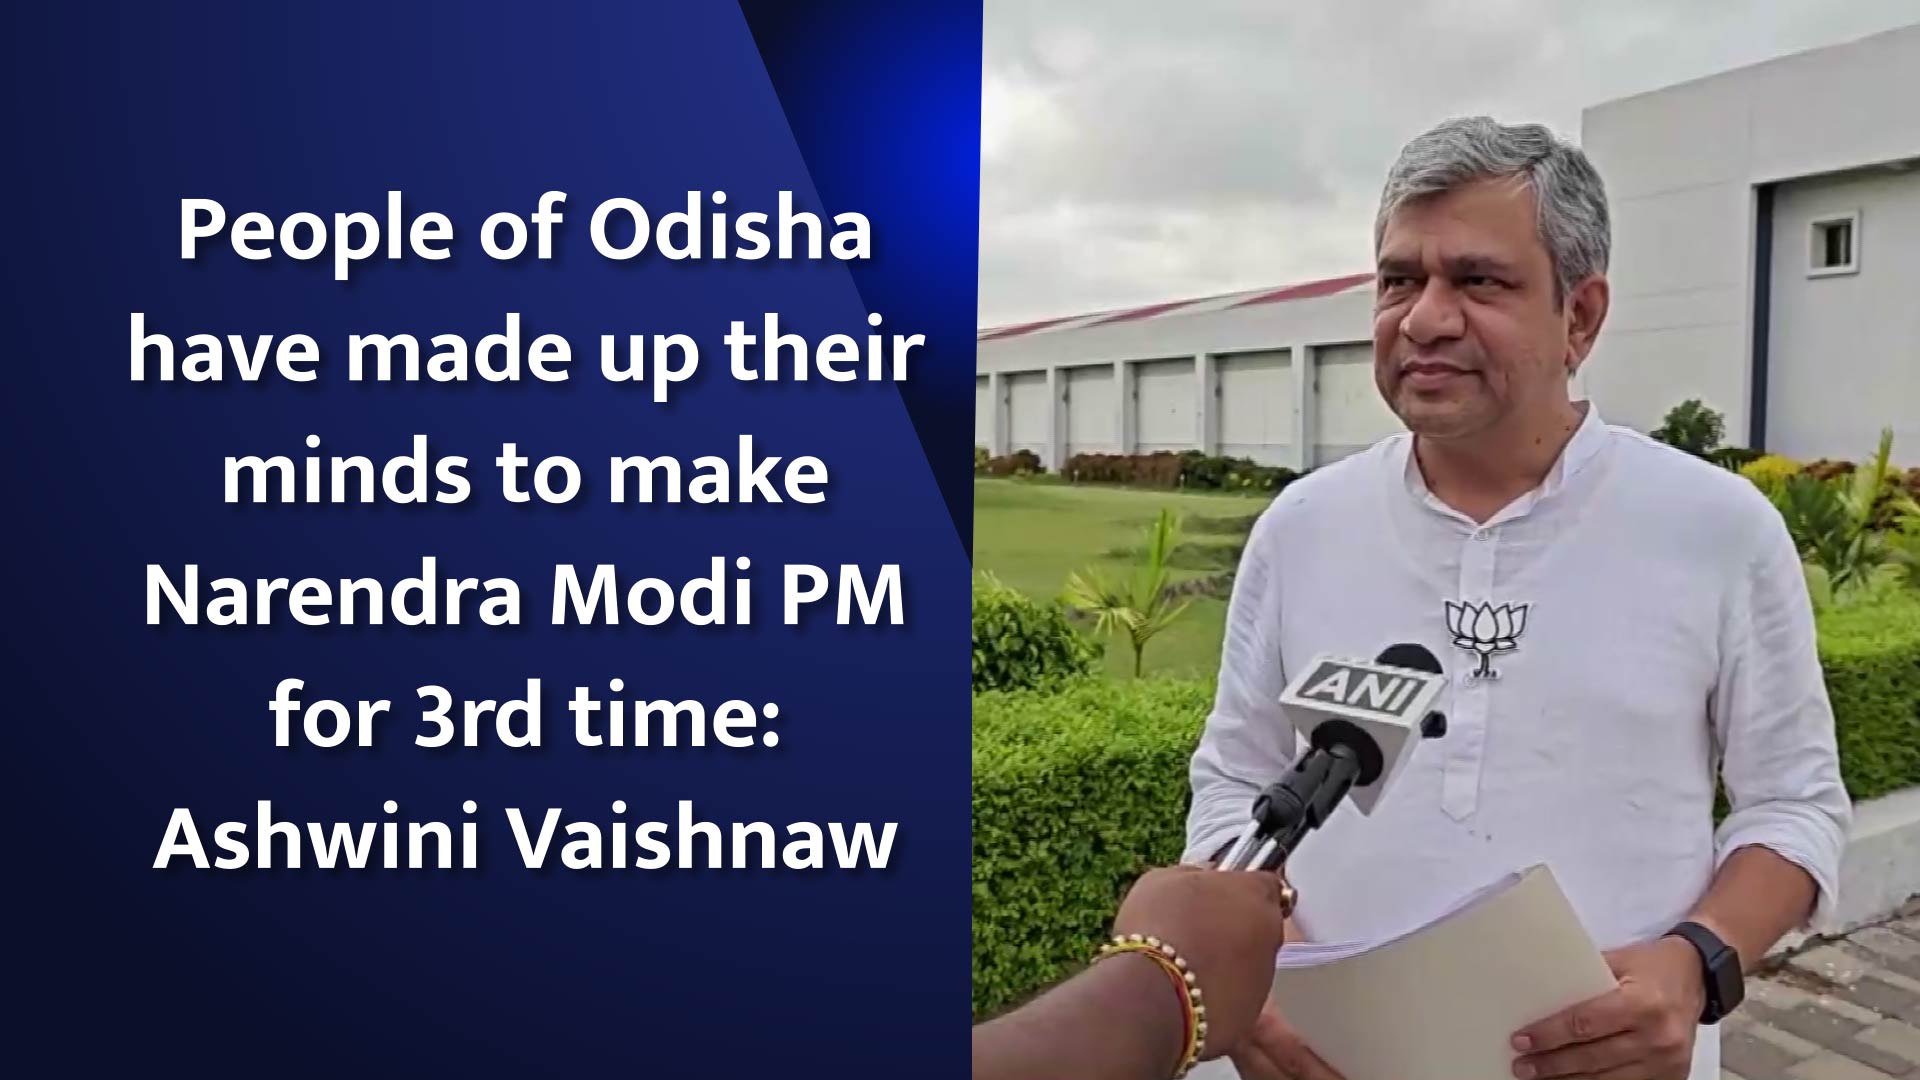 People of Odisha have made up their minds to make Narendra Modi PM for 3rd time: Ashwini Vaishnaw